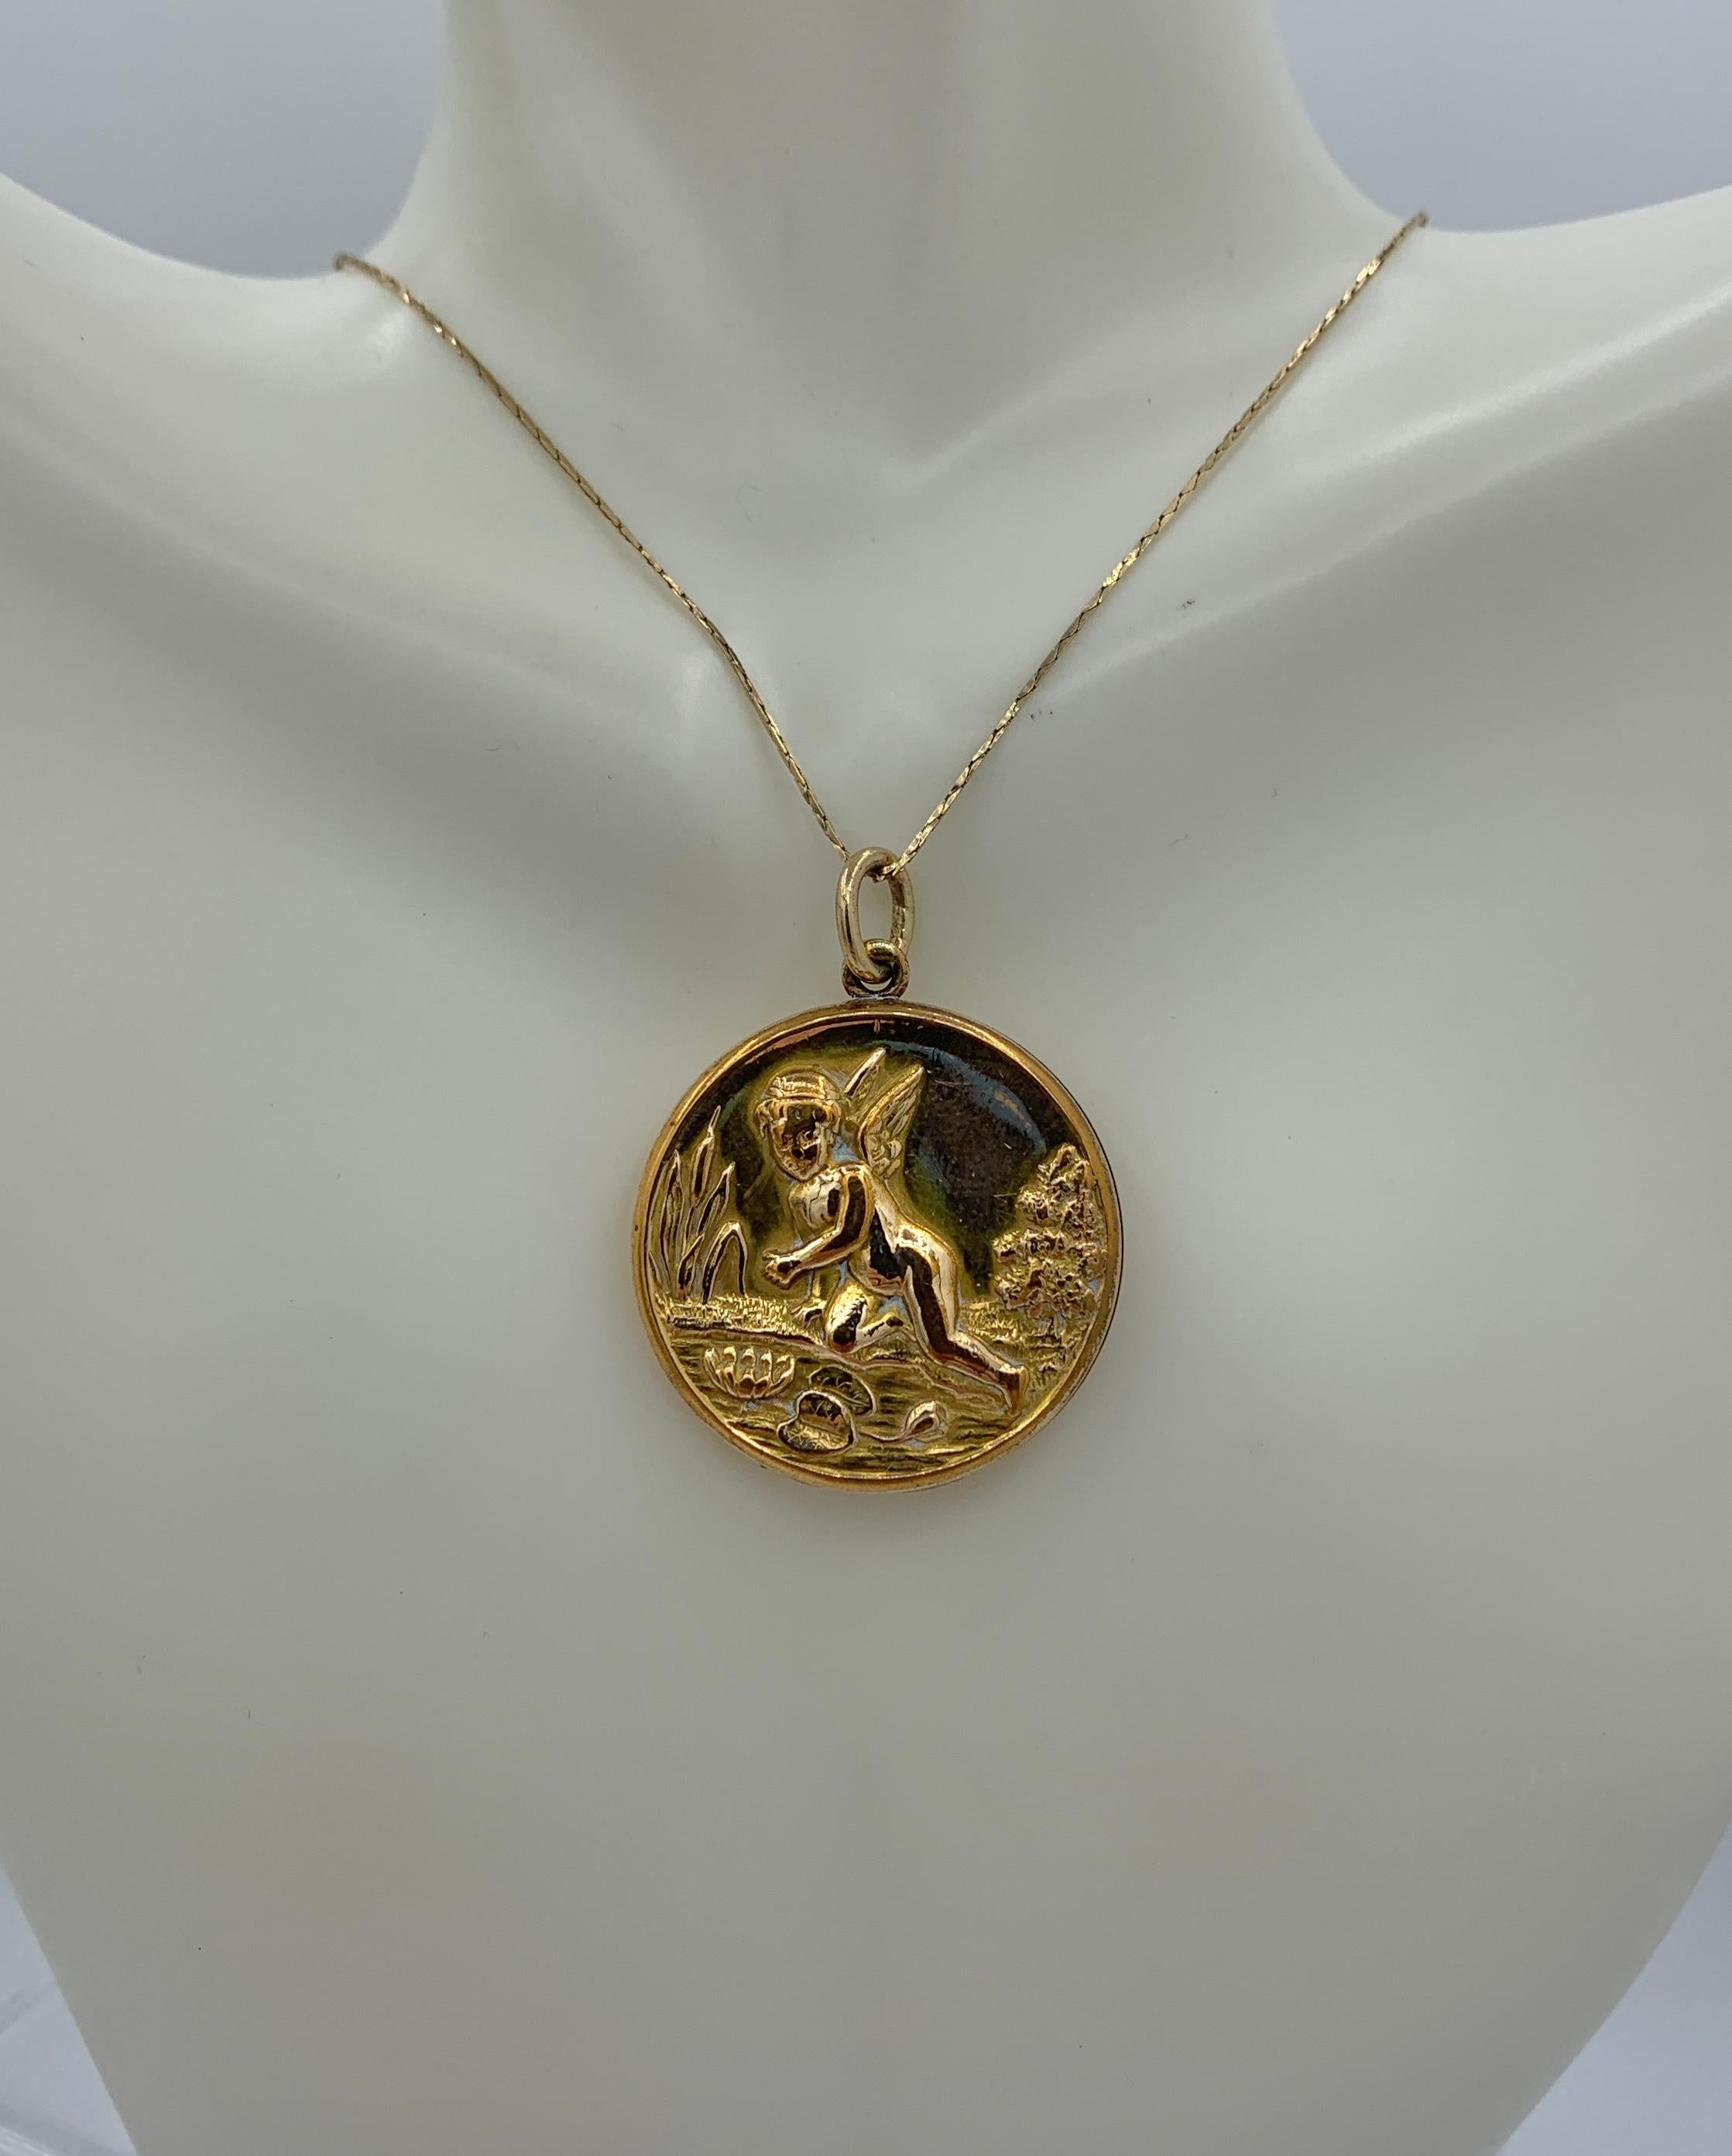 This is a wonderful and rare antique Victorian - Art Nouveau Cherub, Angel, Cupid Locket with Cupid in a Lily Pond with Lily Pads, Flowers, Cattails and Trees.  The design is absolutely exquisite and very rare.  The locket is gold filled.  The image